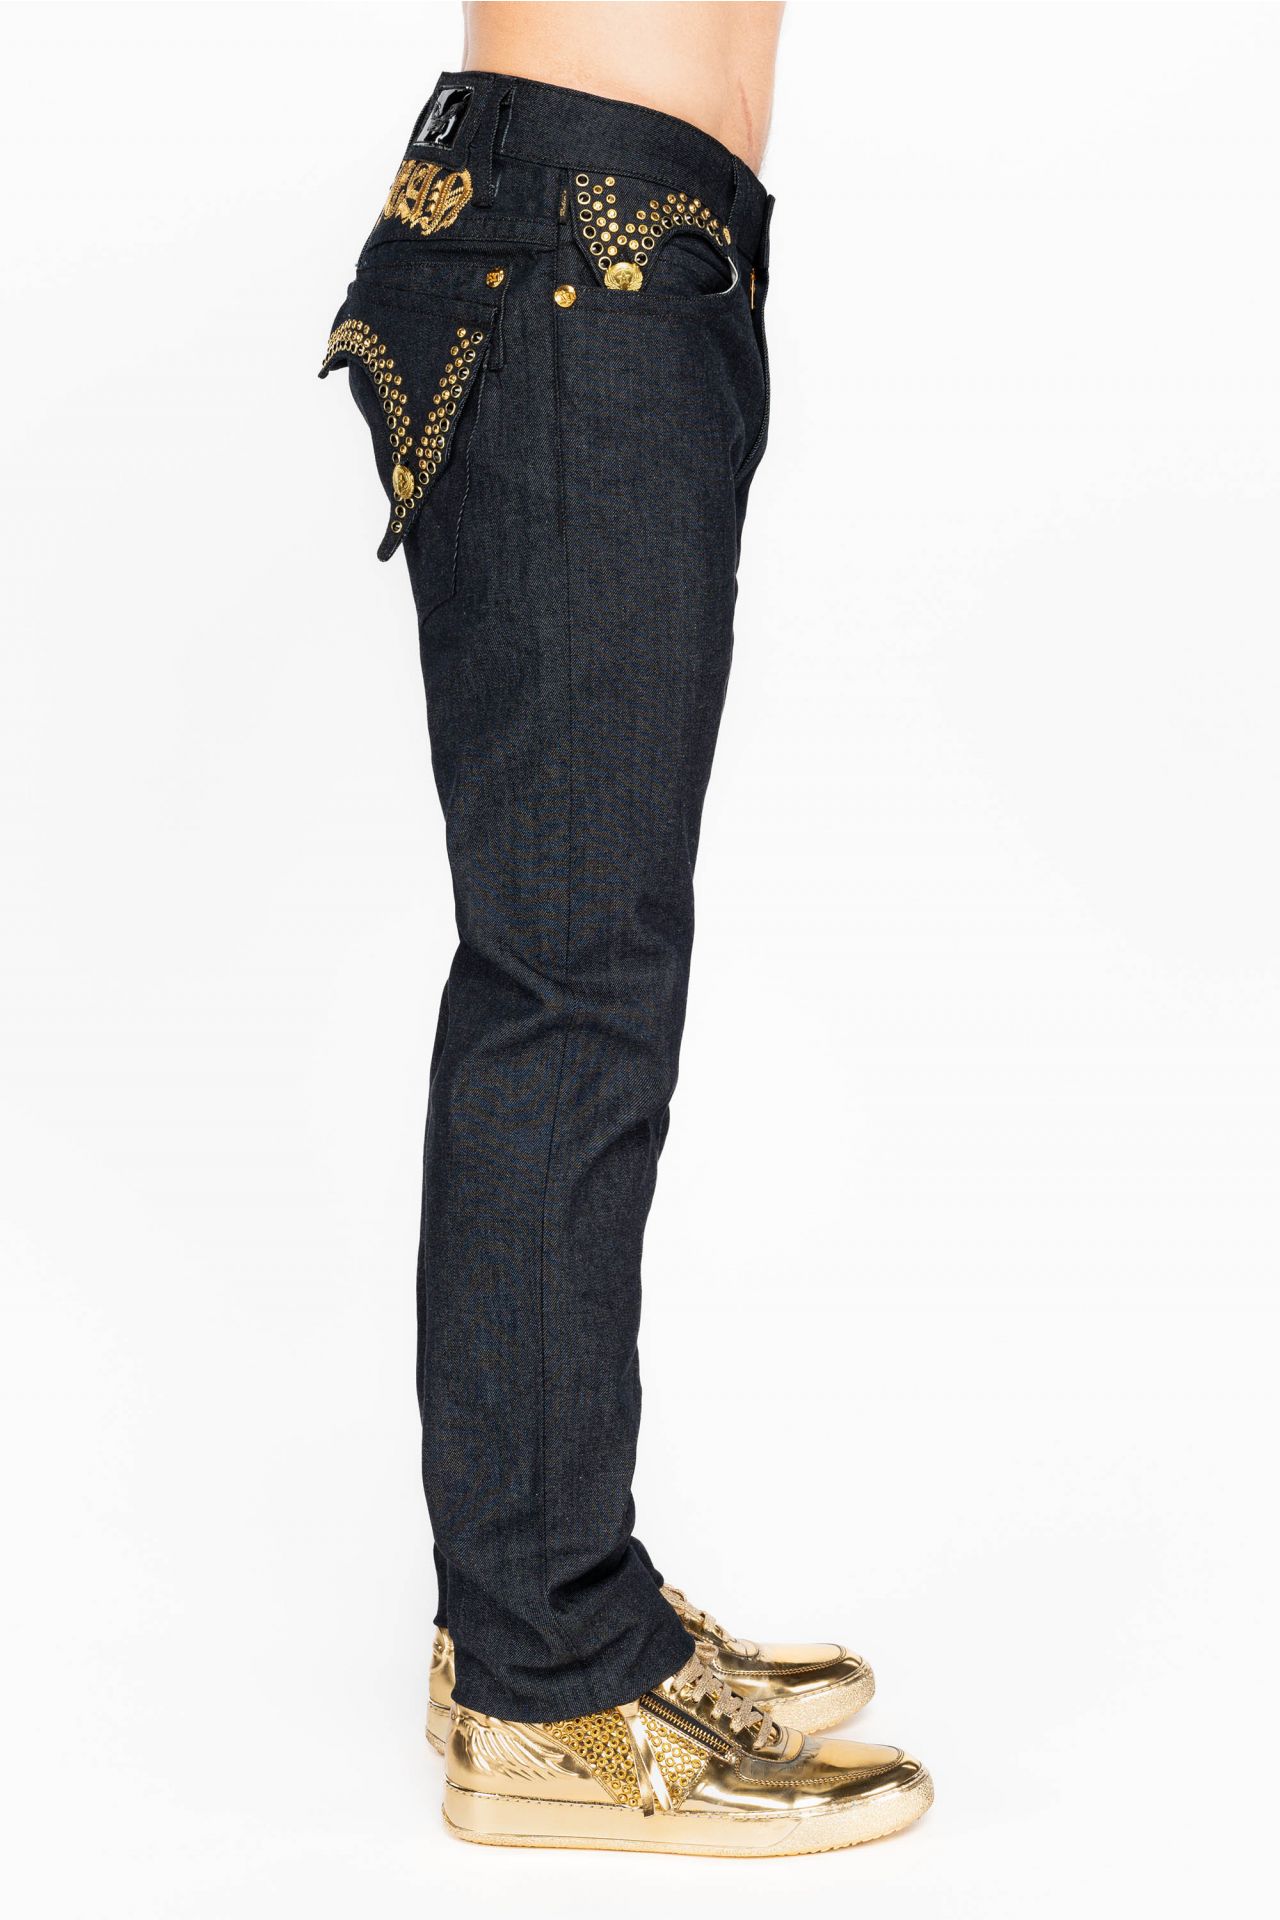 MENS RAW DENIM SLIM FIT KILLER FLAP JEANS WITH GOLD O.E. SCRIPT AND CRYSTALS